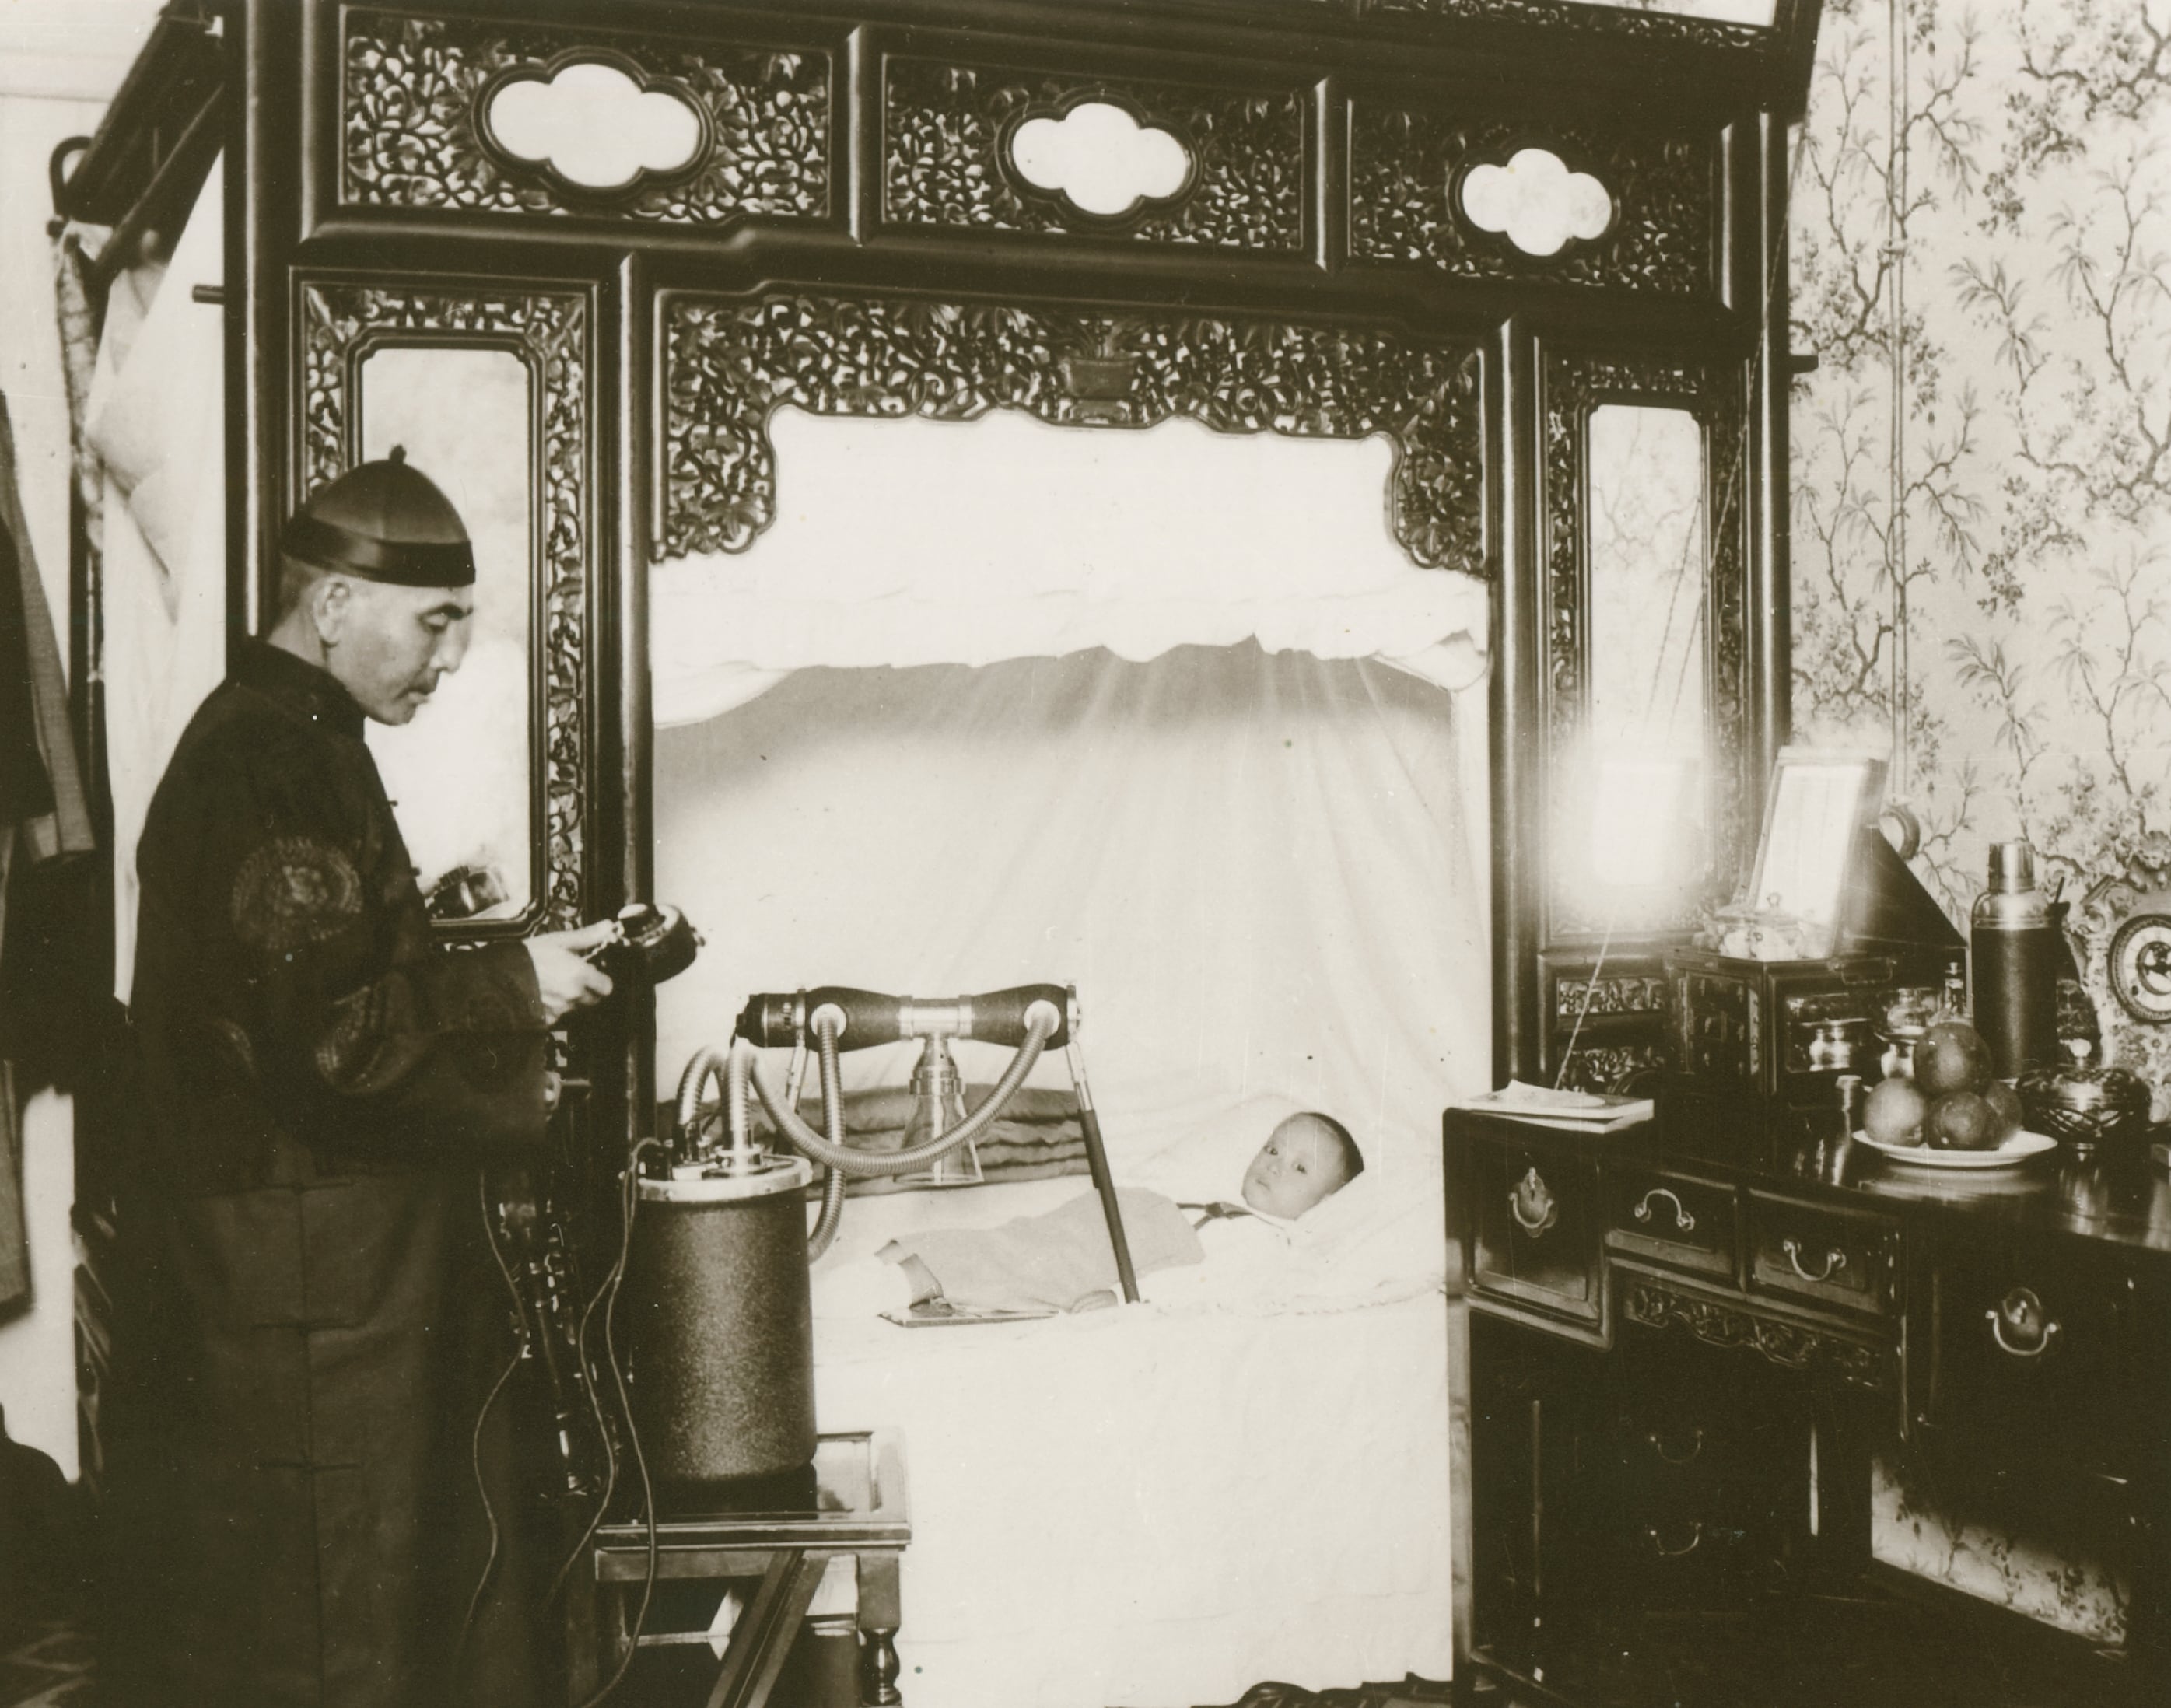 1931 - Philips portable Metalix X-ray system used in the Forbidden City in China during the Qing dynasty